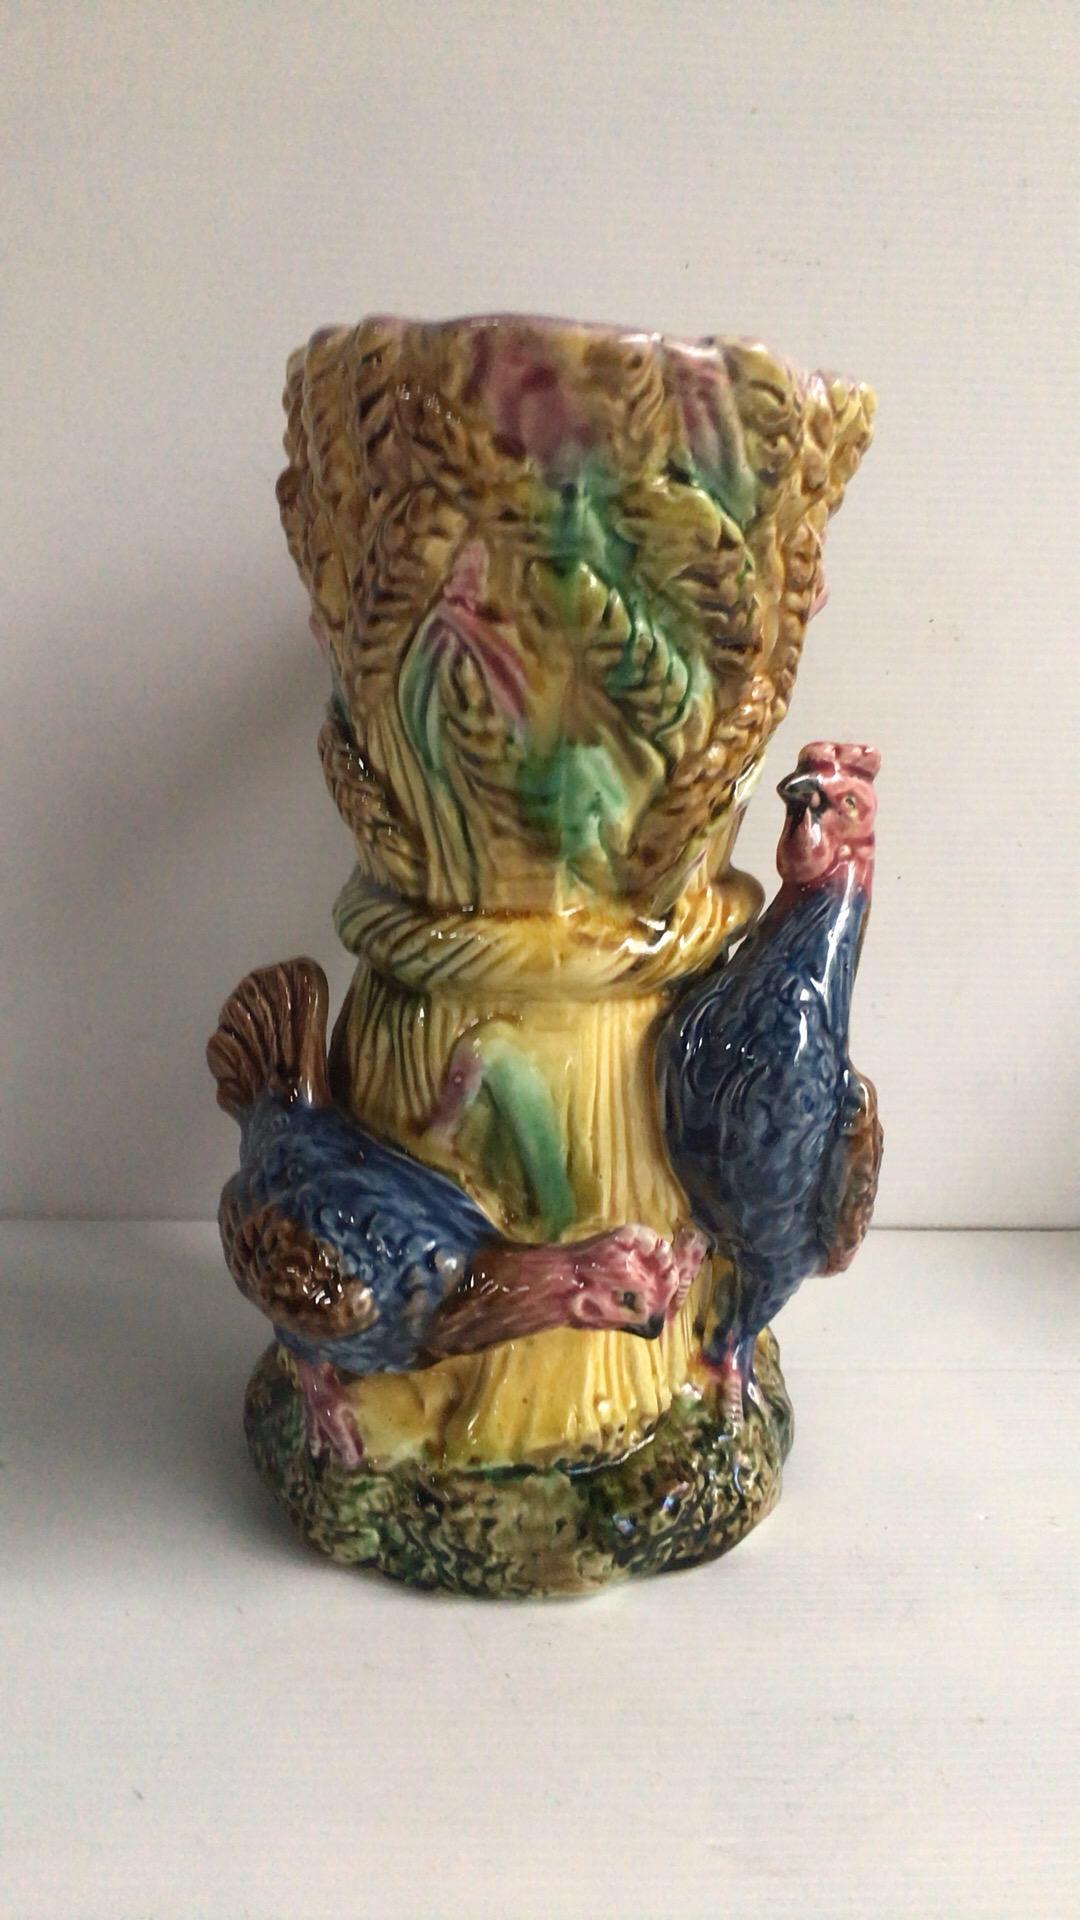 French Majolica rooster and hen pitcher on a wheat and field flowers background, circa 1880.
H 10,5